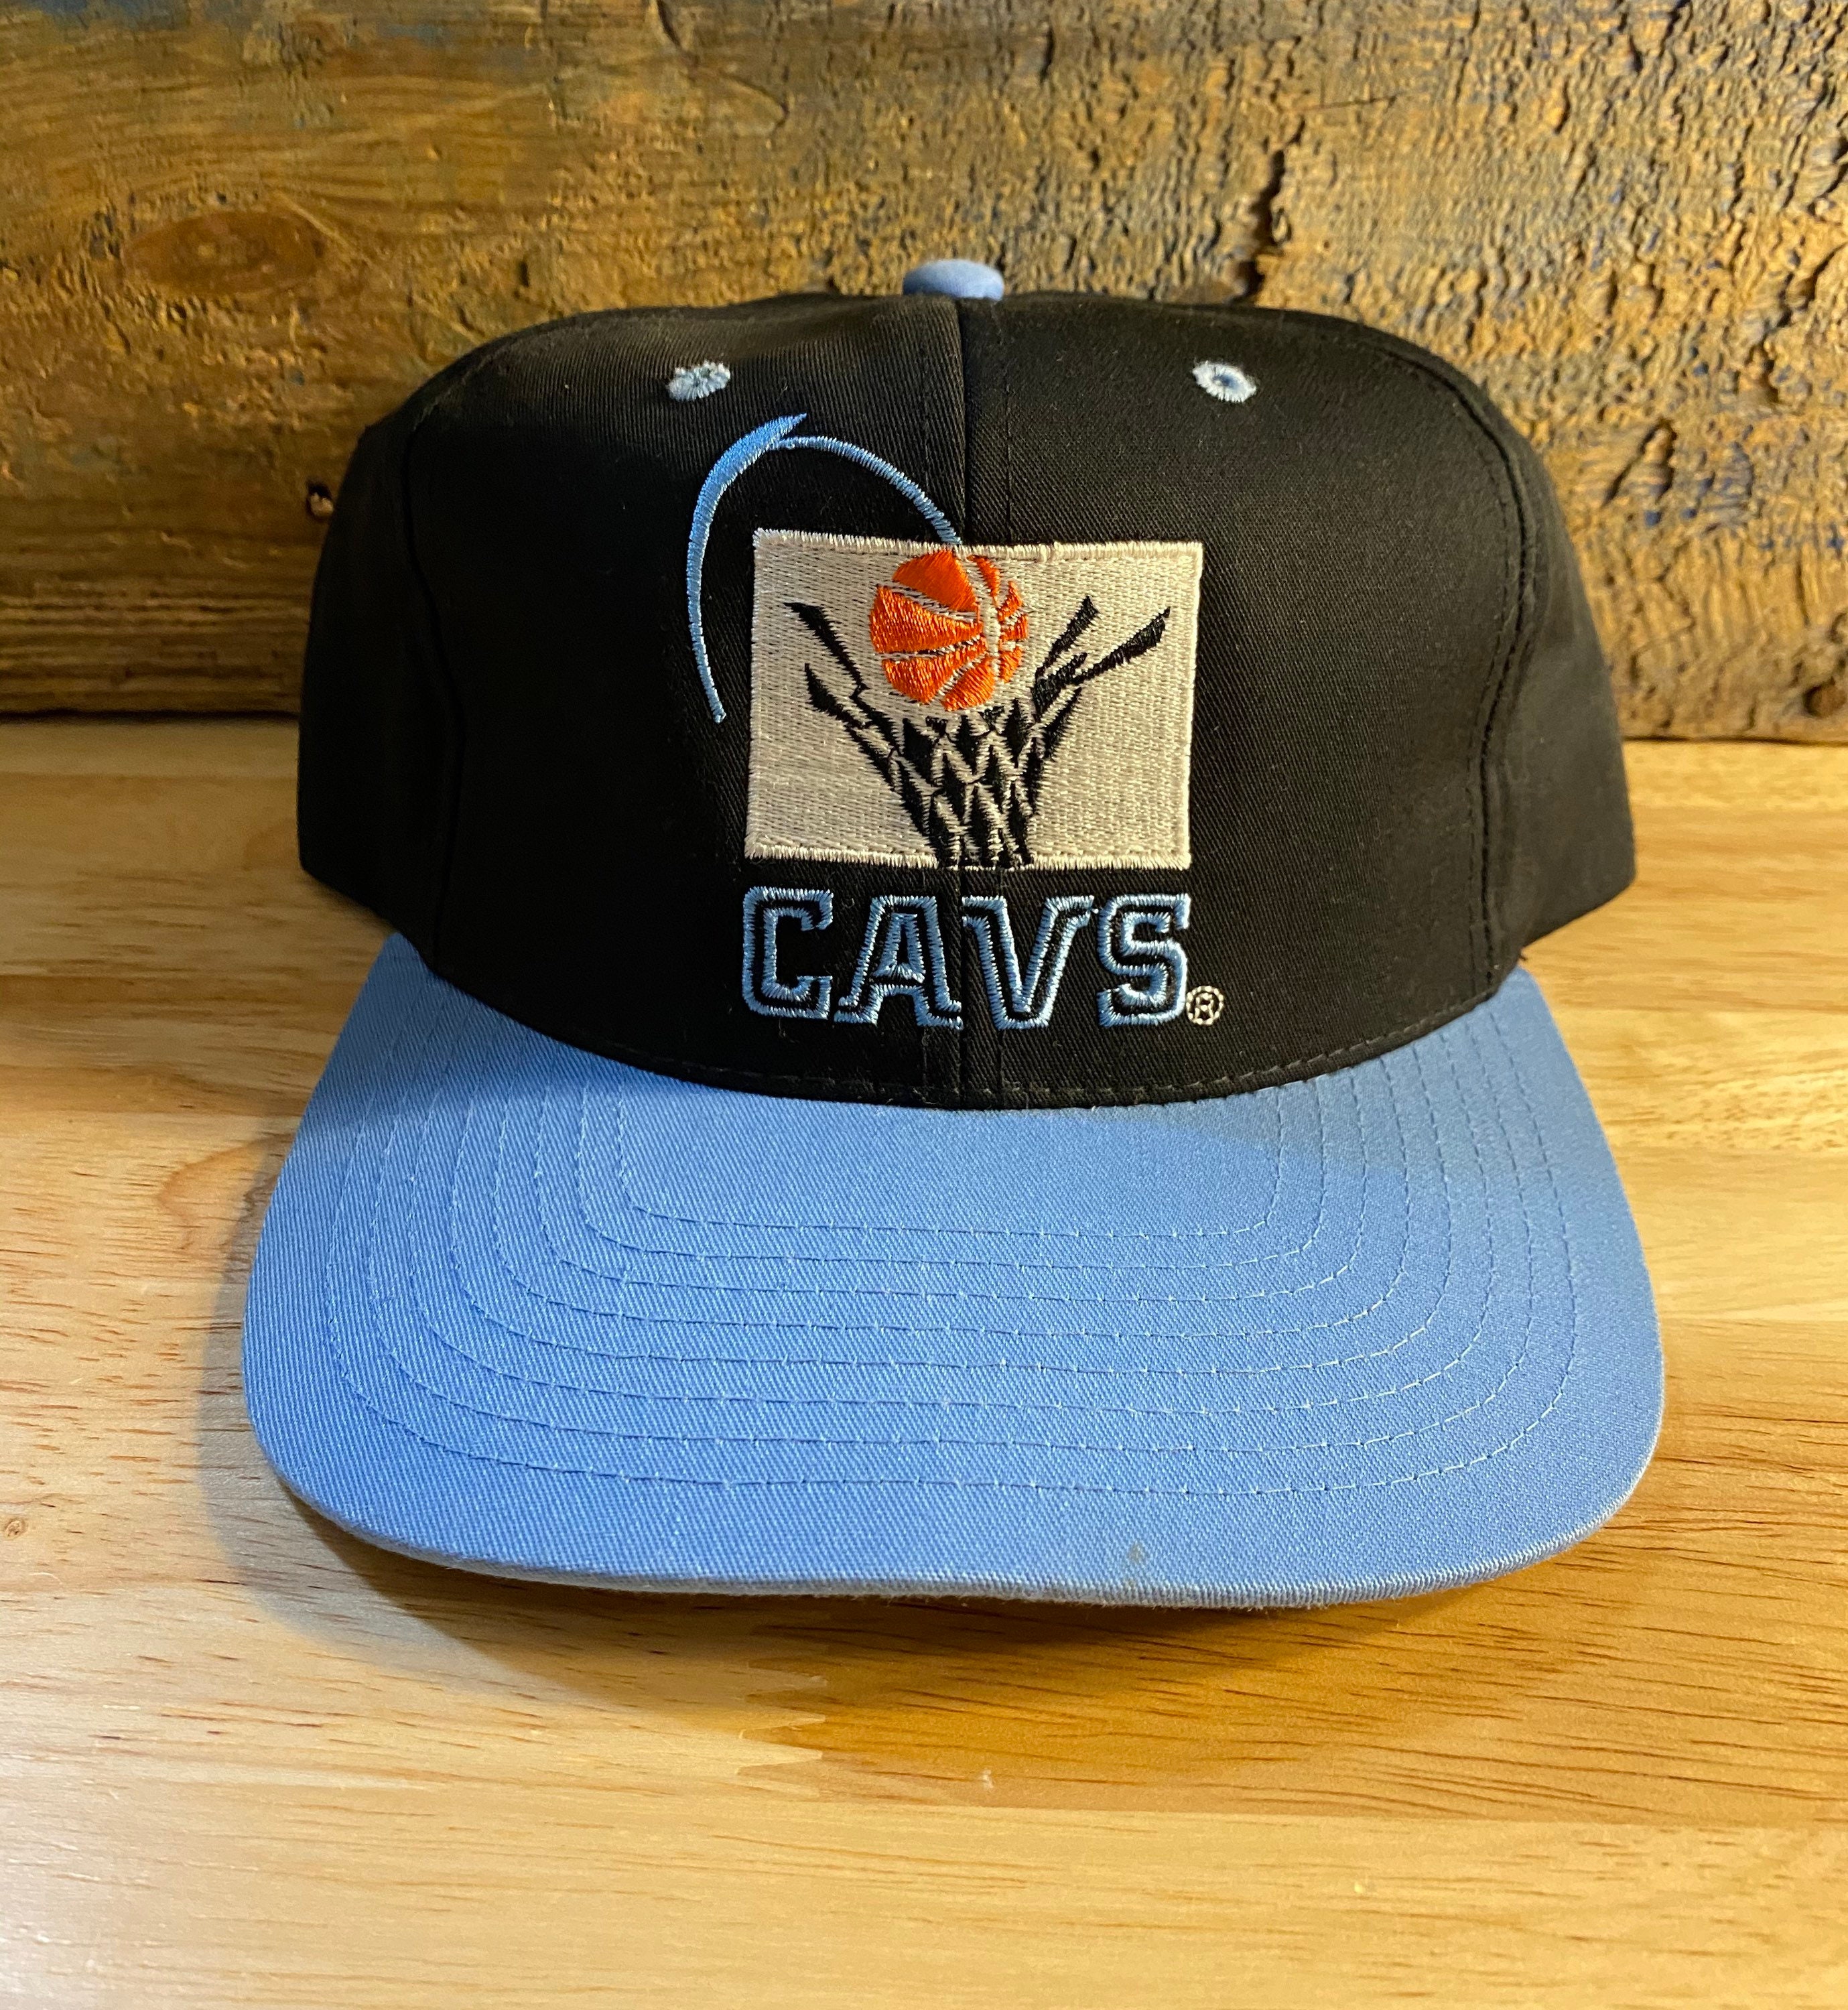 Cleveland Cavaliers Hat Cap Snapback Size S-M Red NBA Basketball